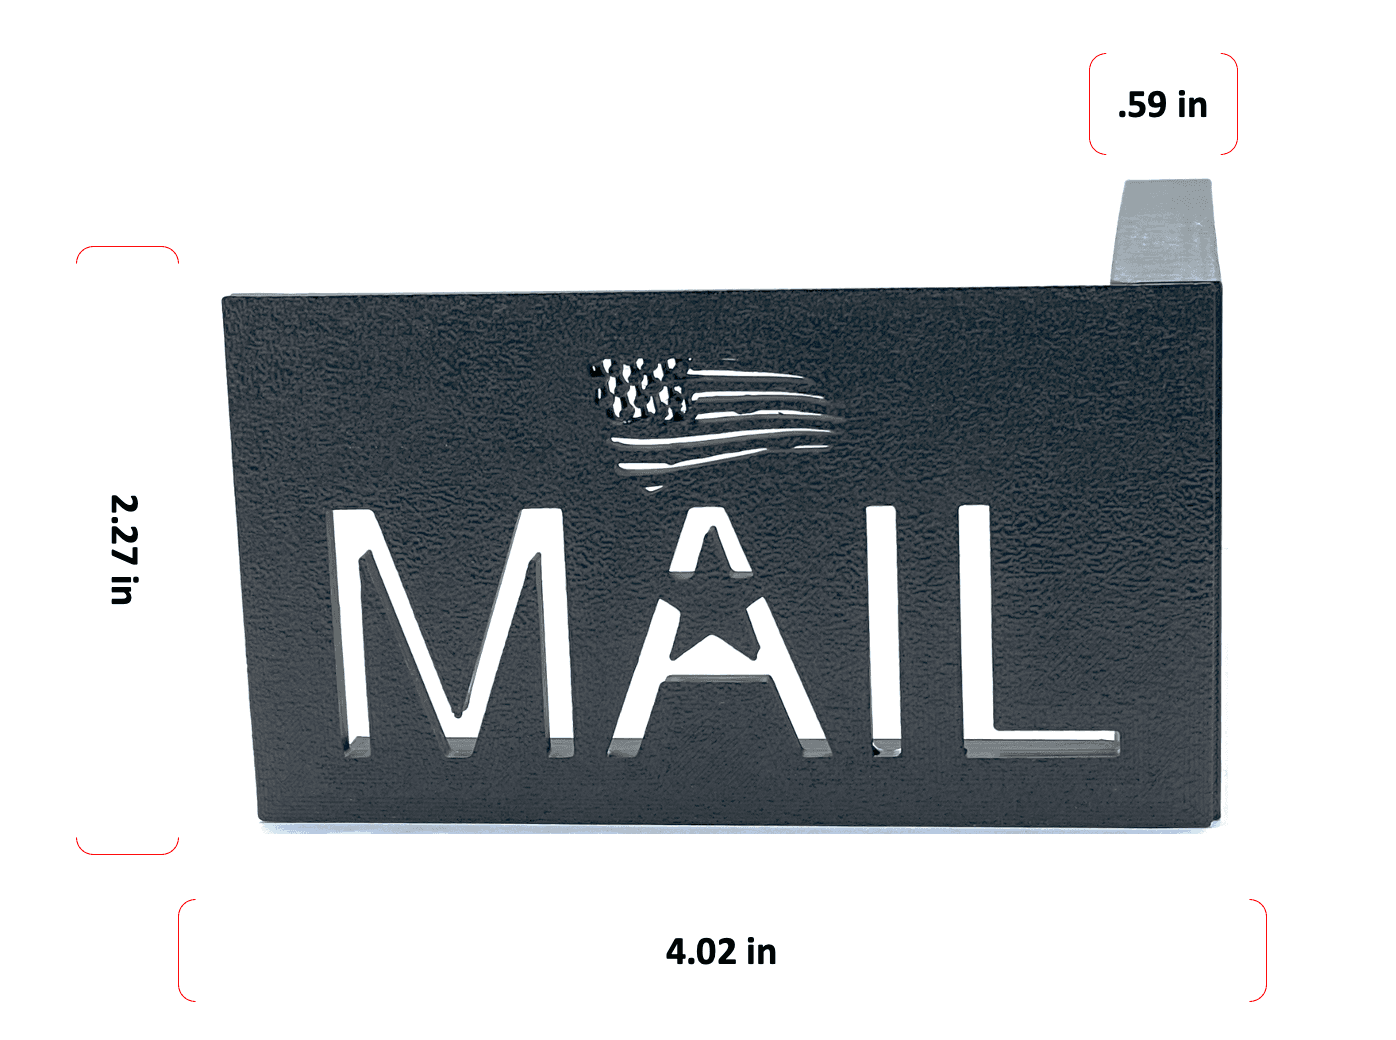 Mailbox Flag for Stone or Brick Mailboxes is a larger size for increased visibility in the open position. The black color of this unique flag will blend in if placed on a black mailbox.